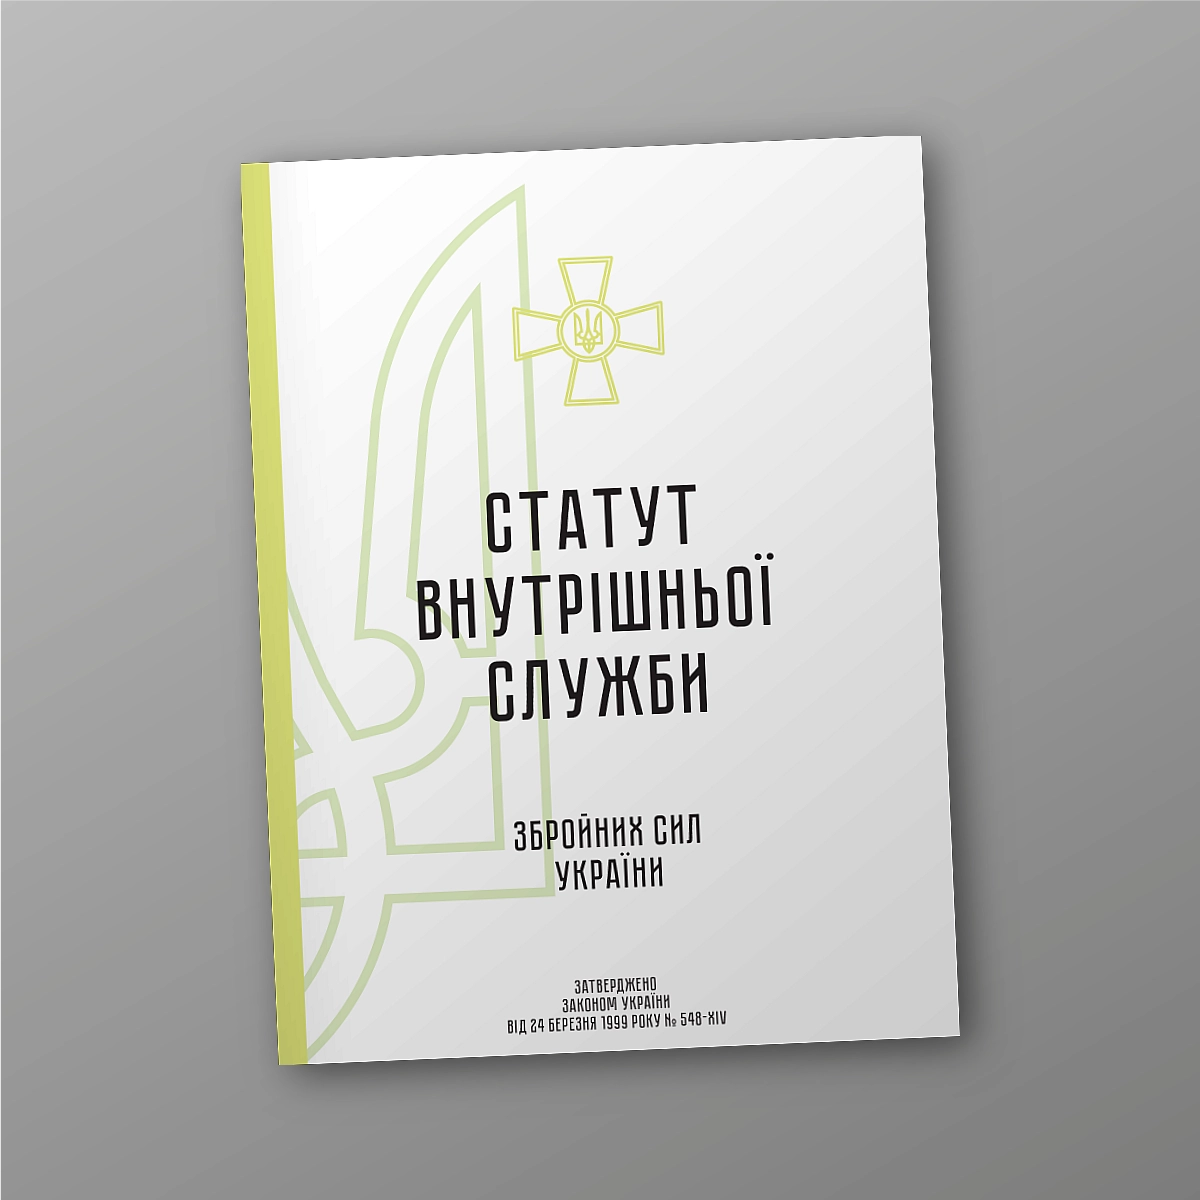 Statute of the internal service of the Armed Forces of Ukraine | PrintTo: